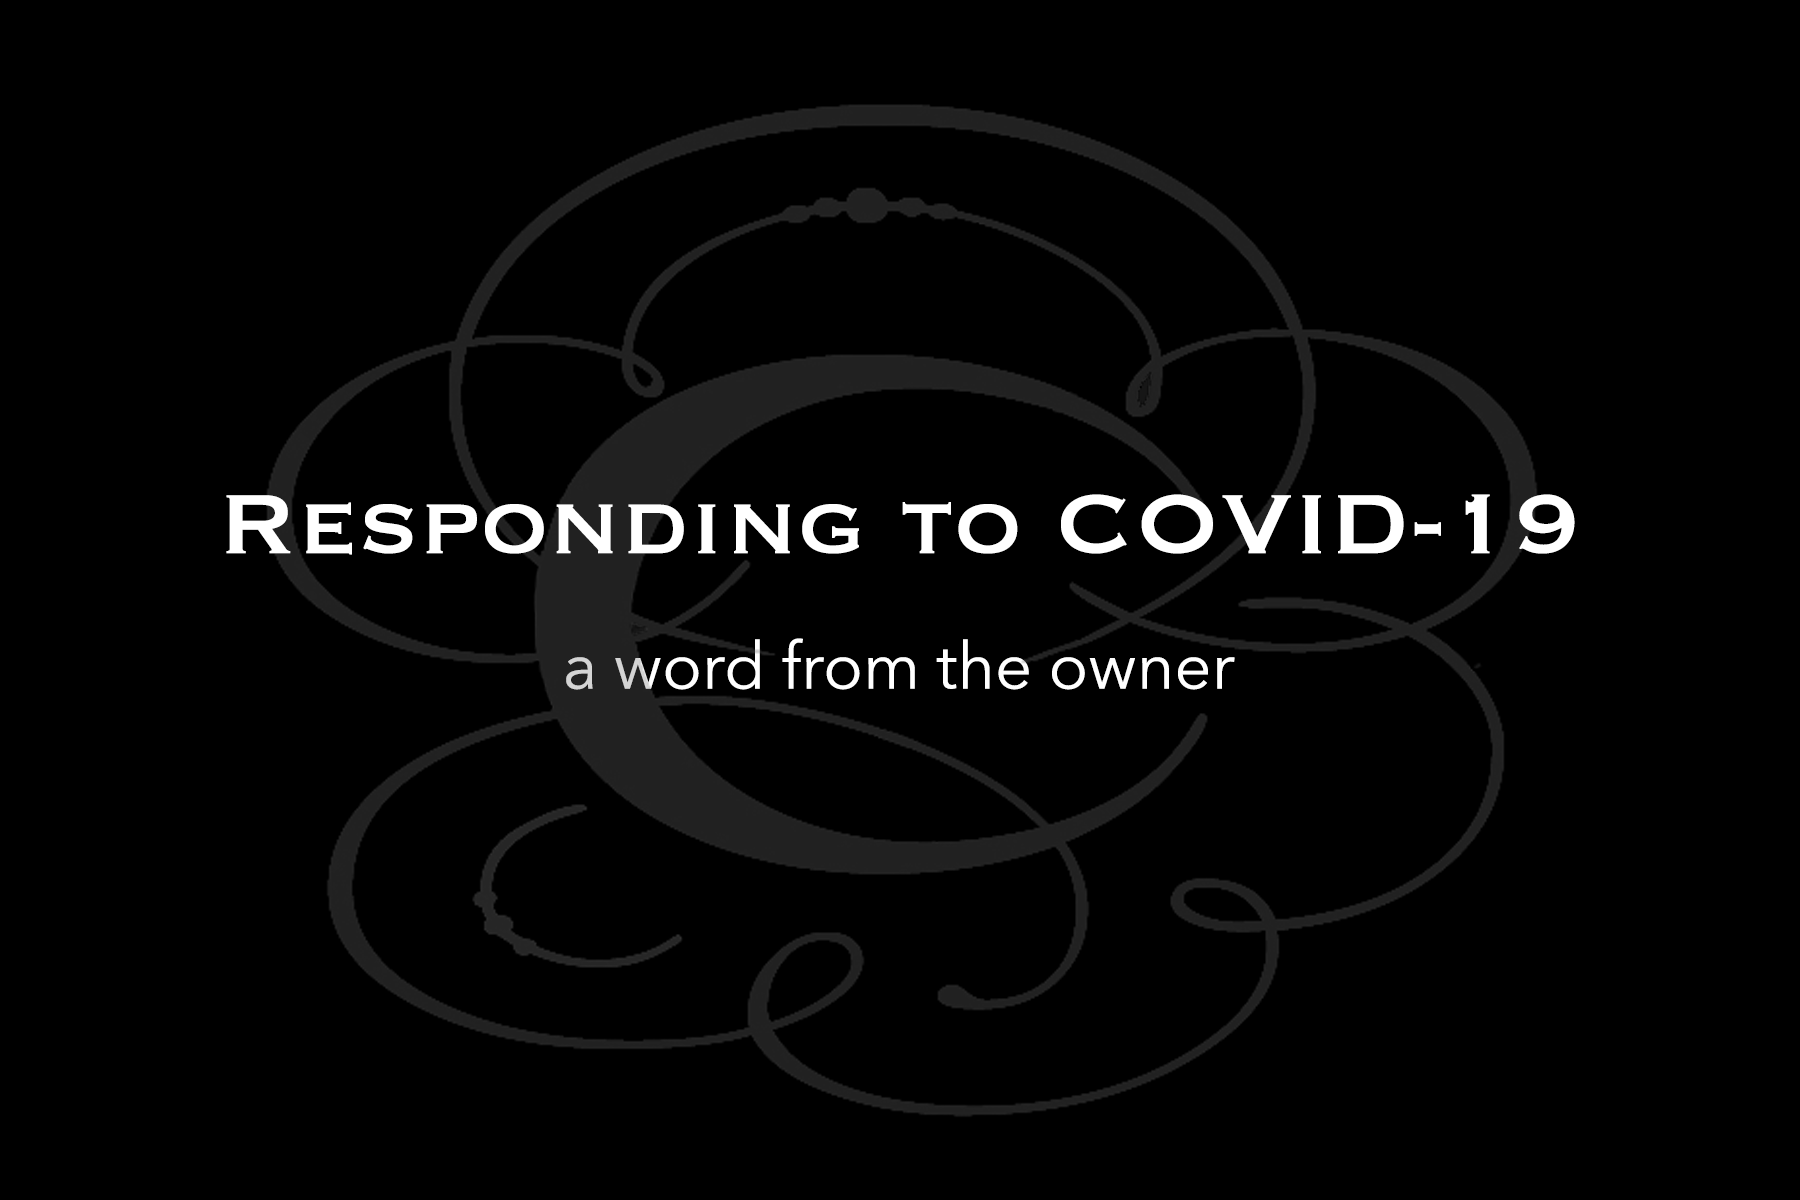 Responding to COVID-19: A Word From The Owner